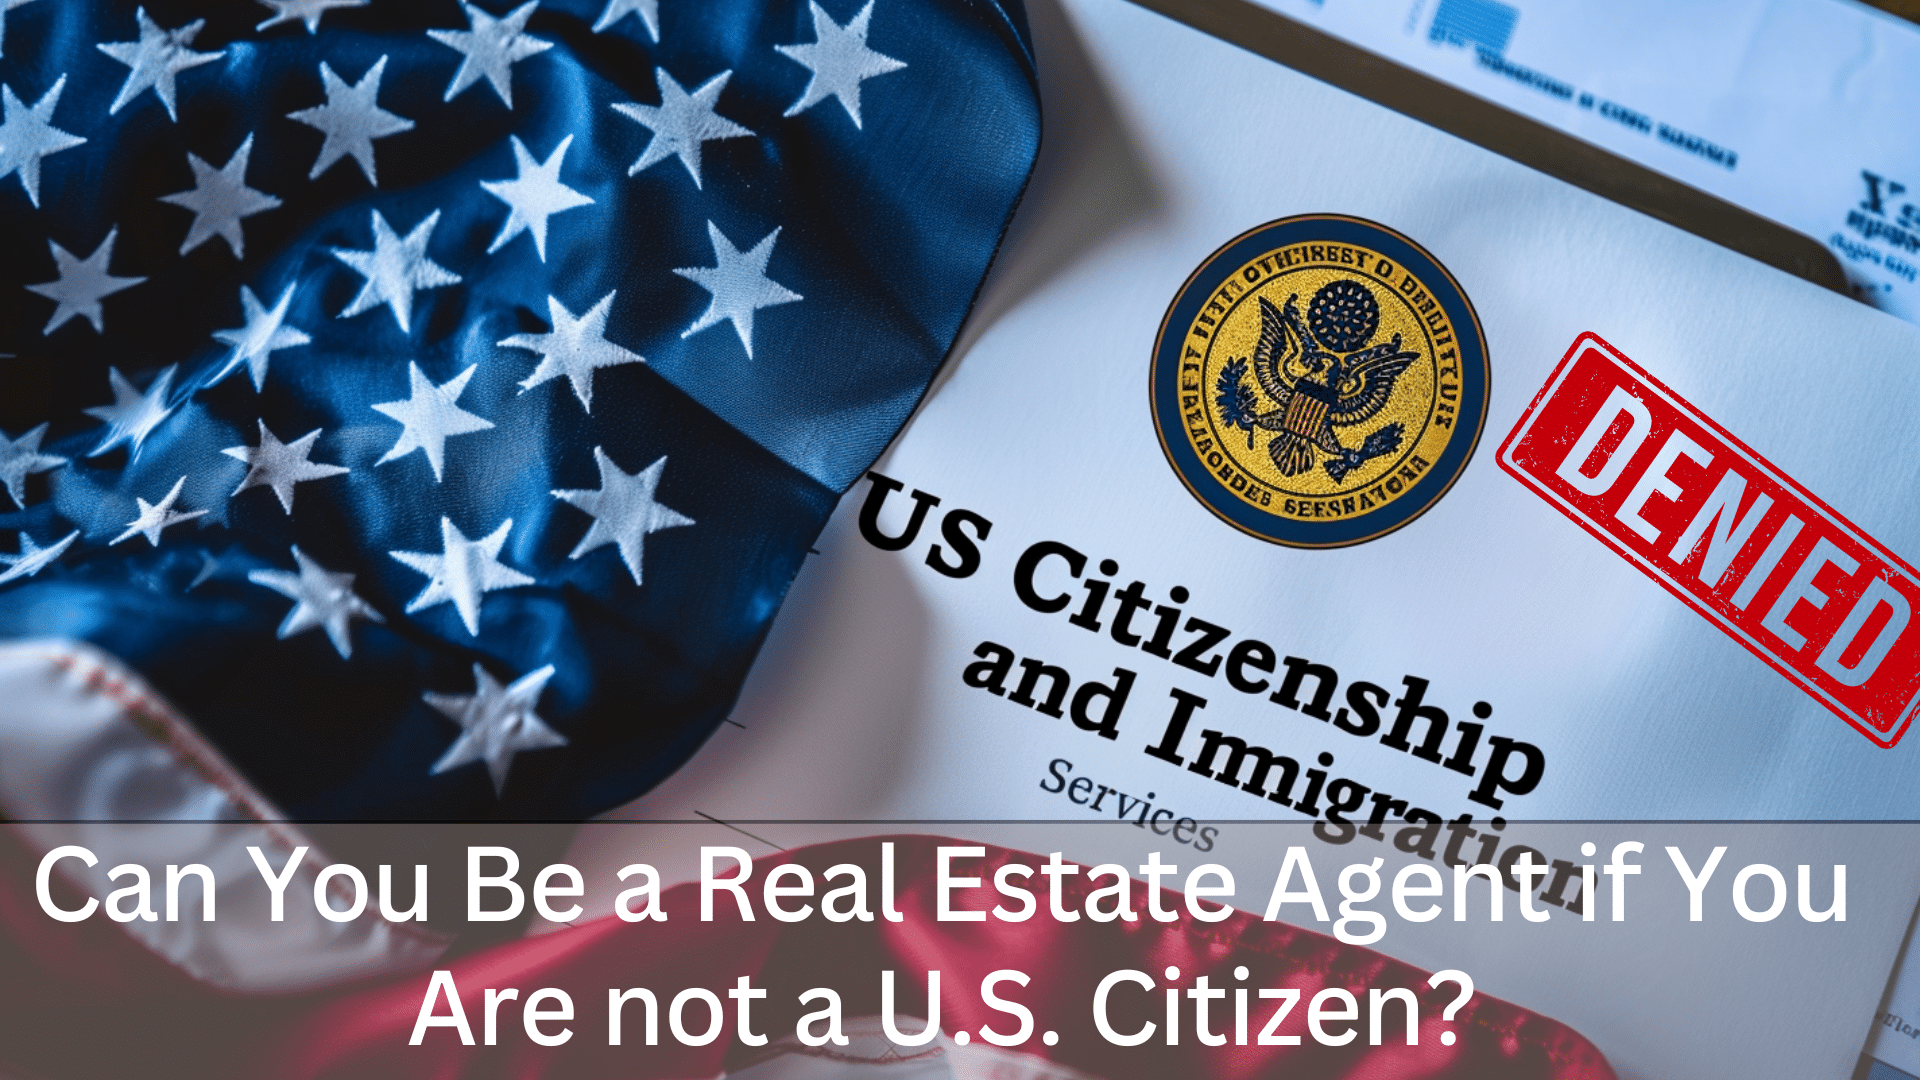 can you be a real estate agent if you are not a U.S. citizen illustration